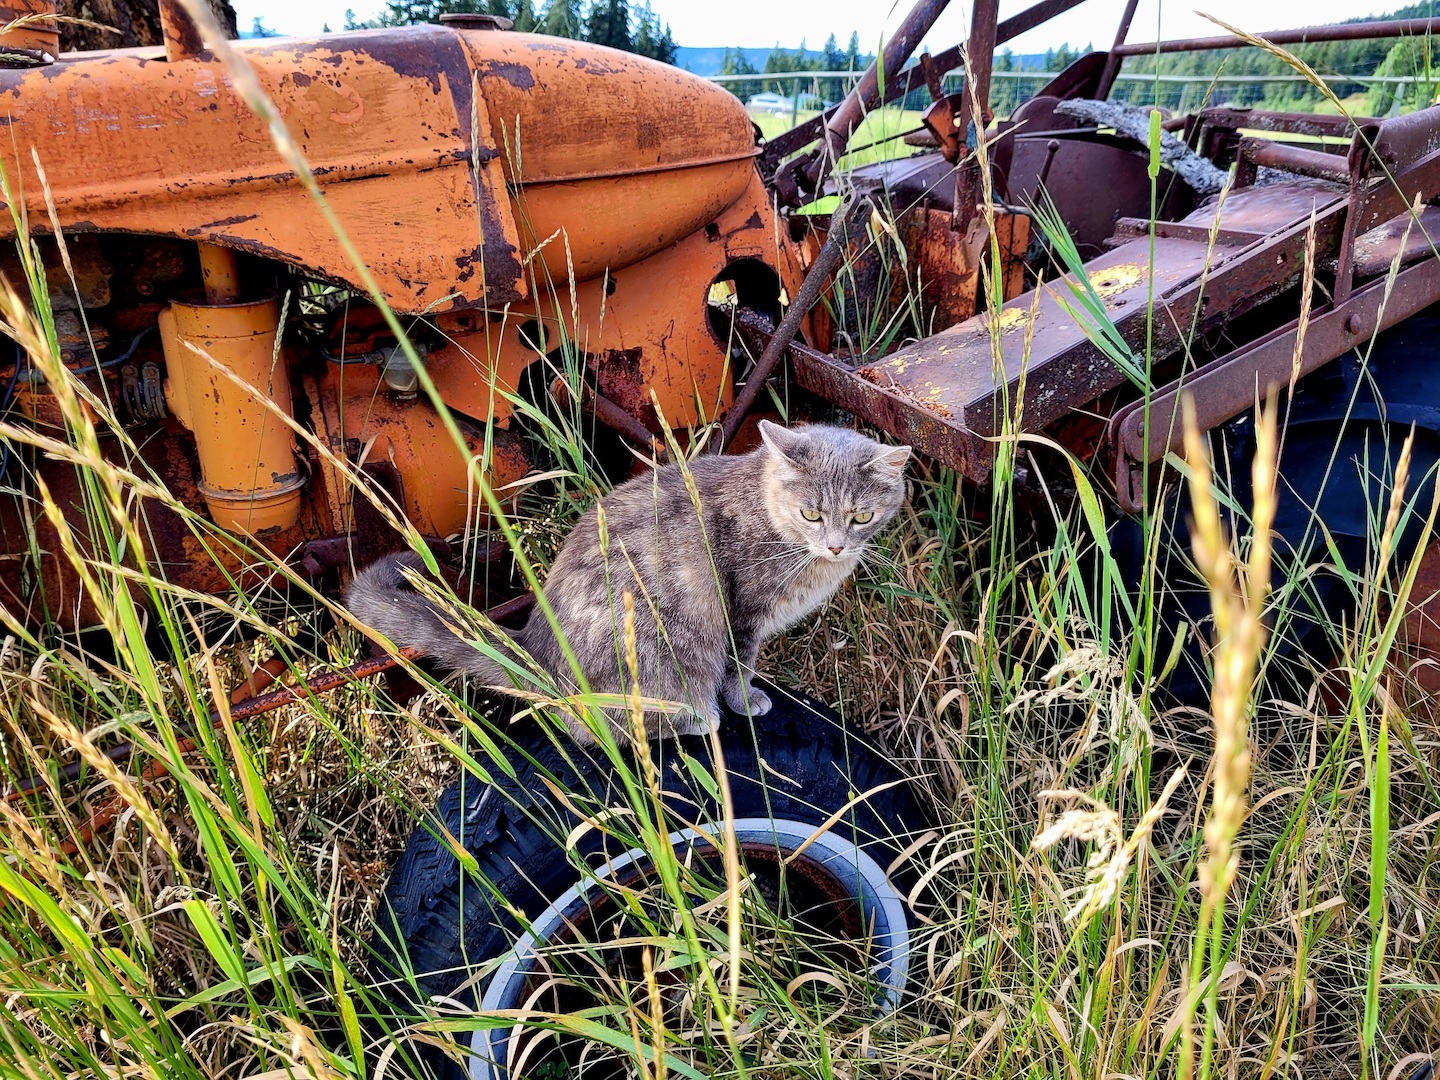 photo of a grey cat on a rusted tractor with tall grass